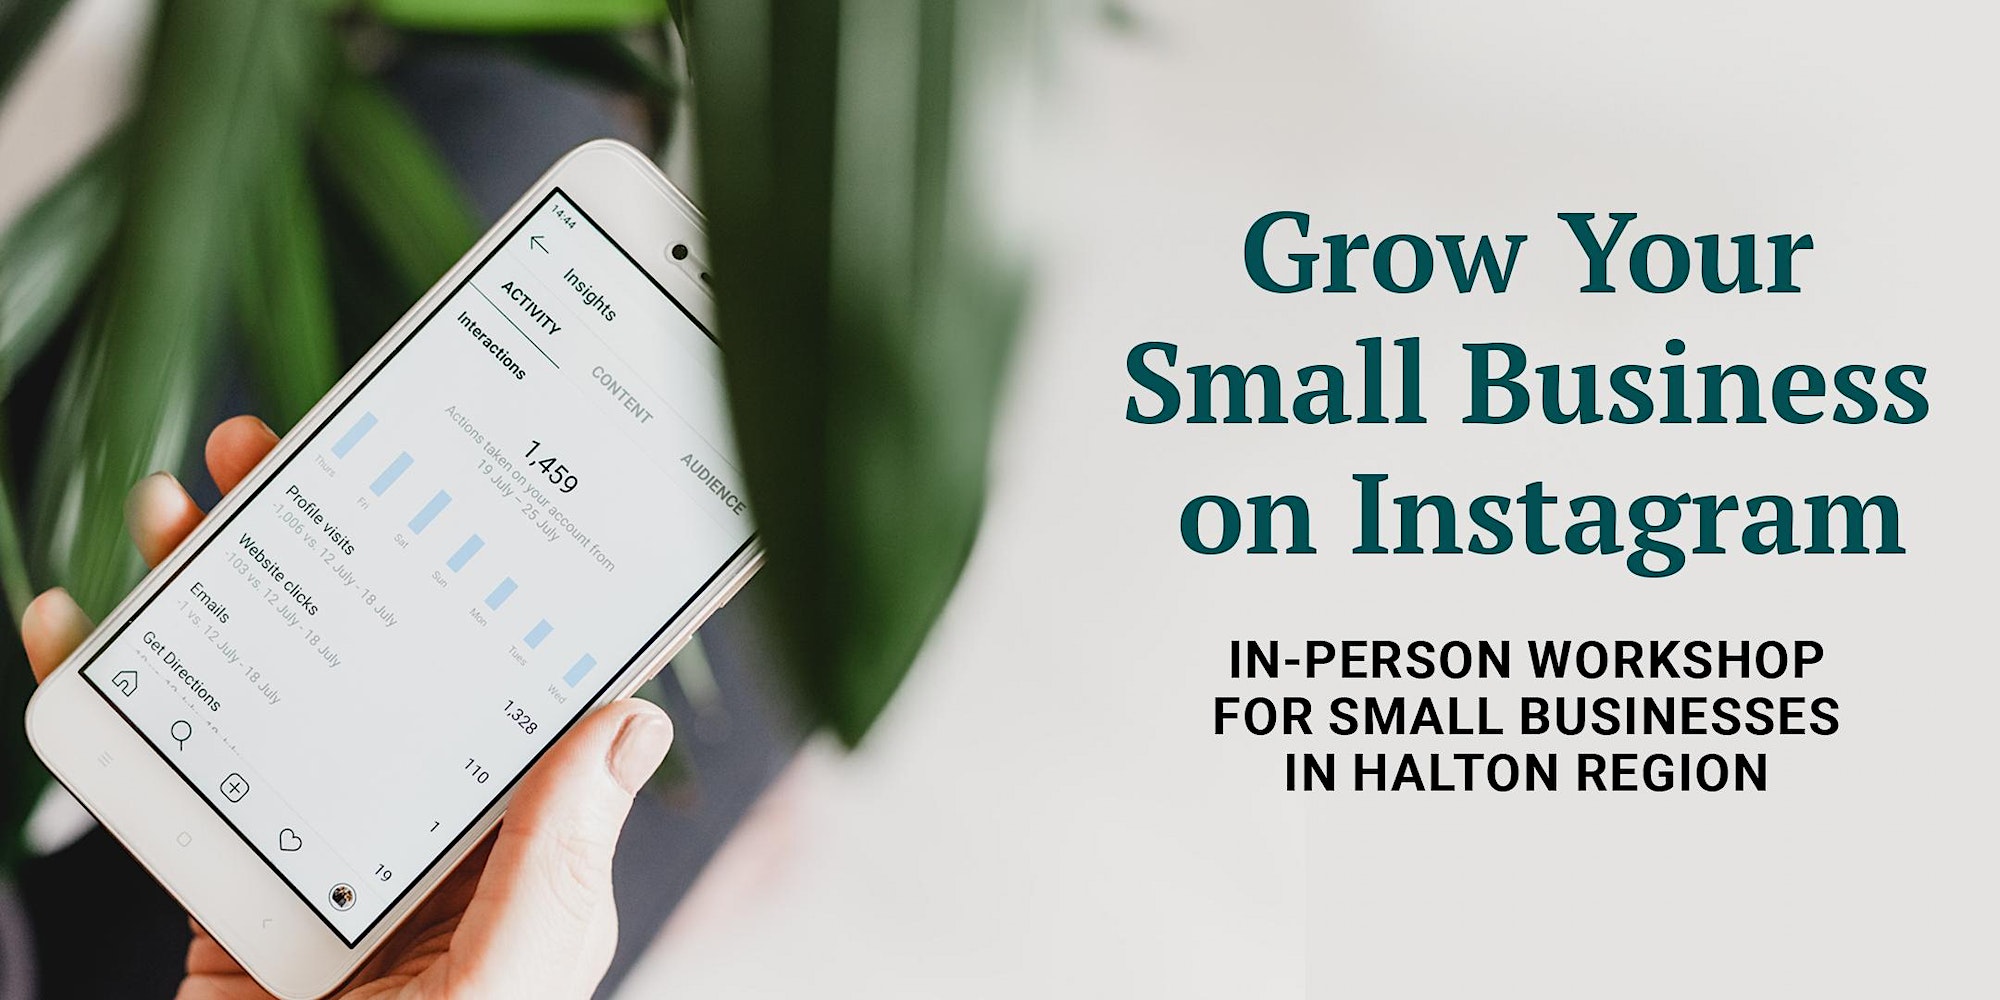 Grow your small business on Instagram: In-person workshop for small businesses in Halton Region.